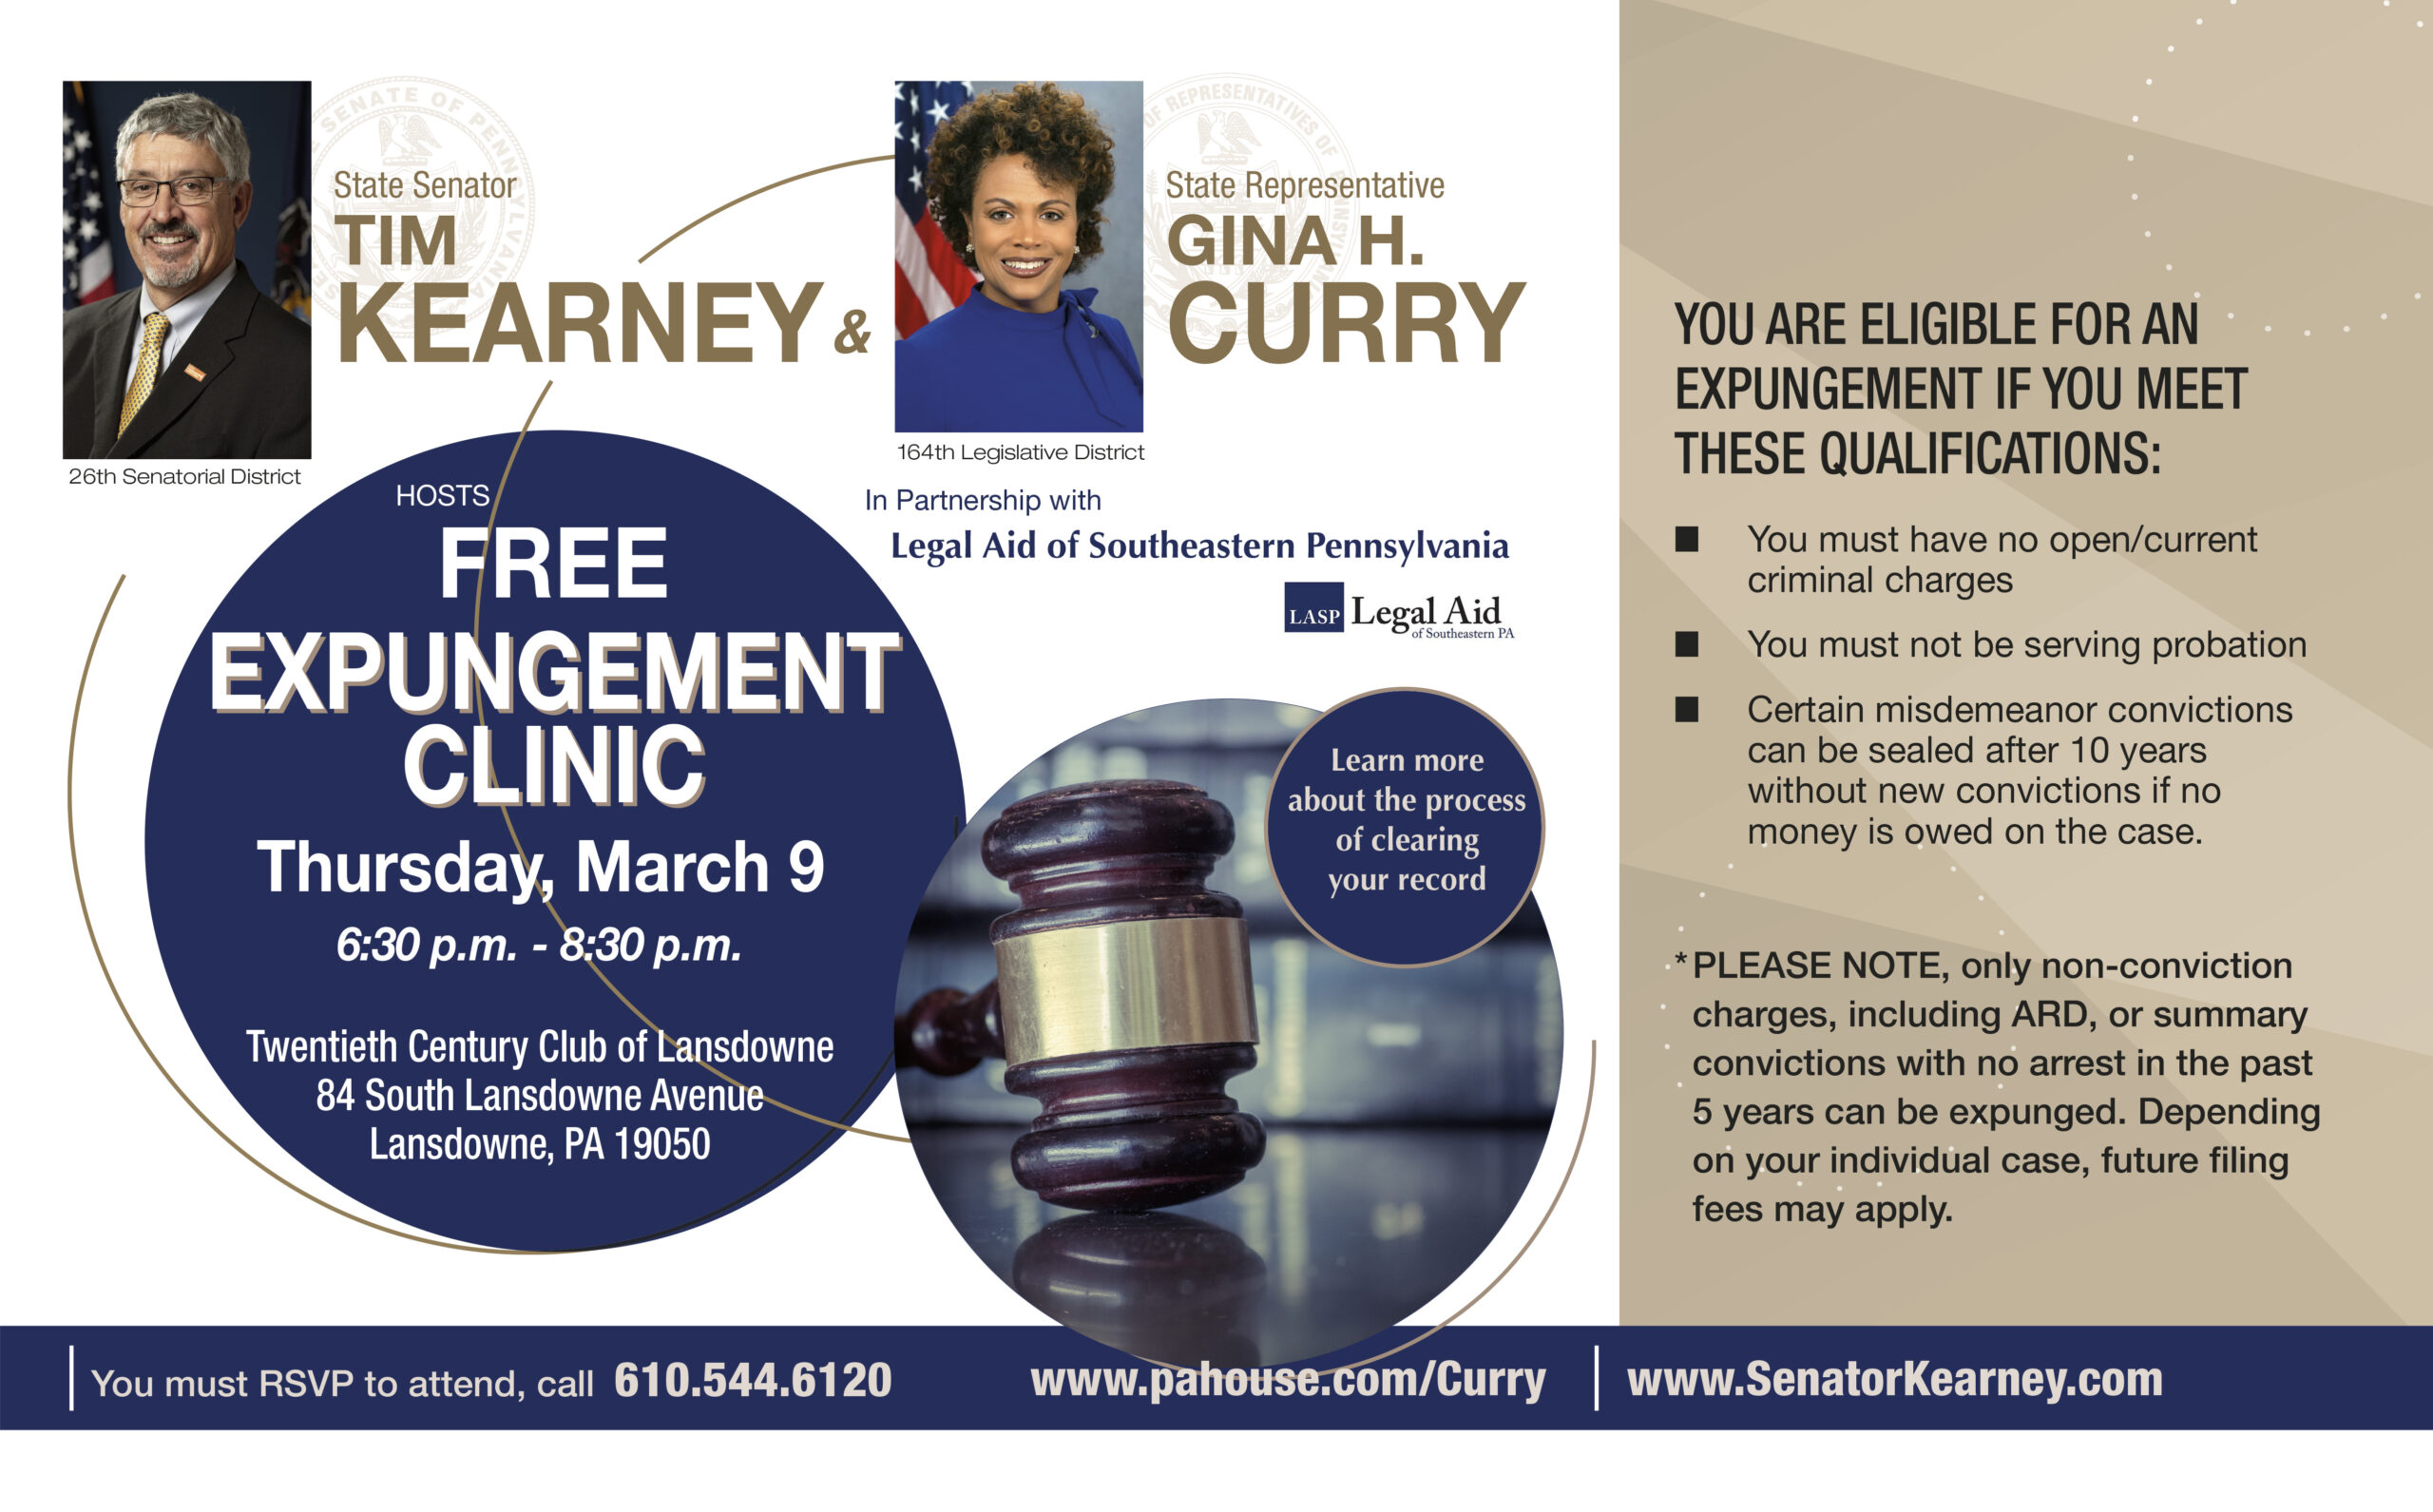 Kearney Expungement Clinic